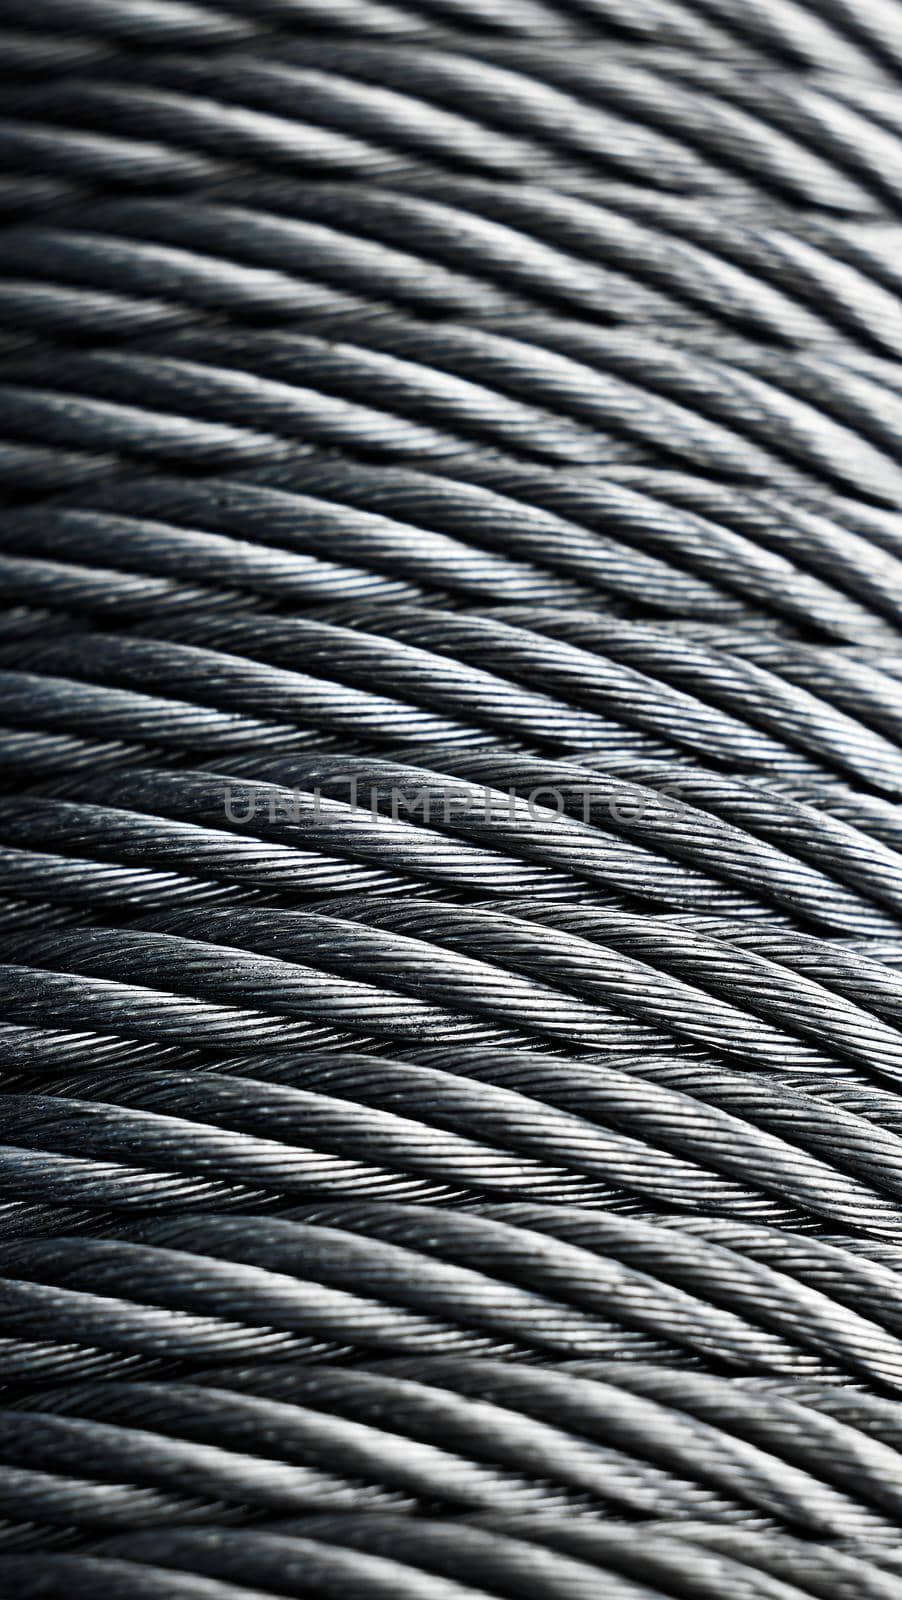 Metal cable winch. Steel rope winch close-up. Strong still background.